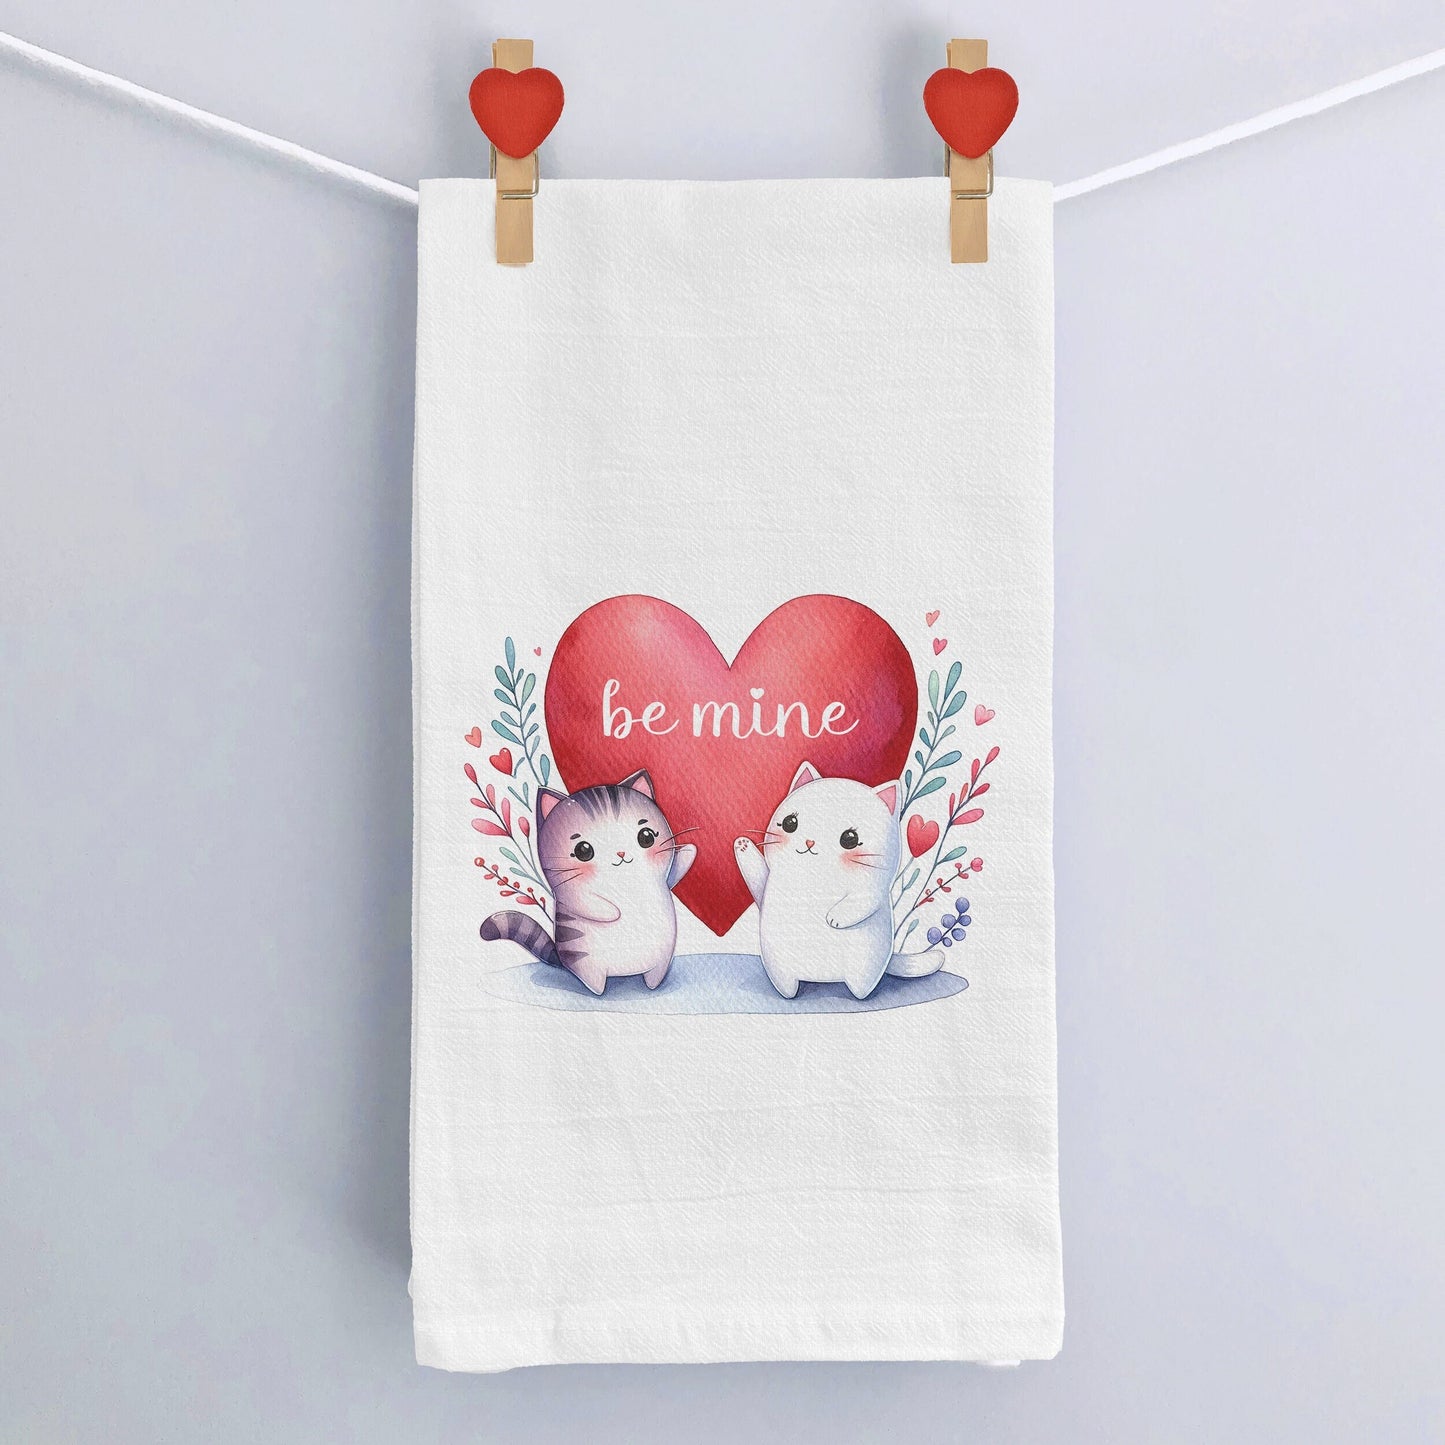 Be Mine Heart with Two Cute Cats  Valentine's Day Kitchen Towel -Flour Sack Kitchen Tea Towel, Valentines Day  Kitchen Decor